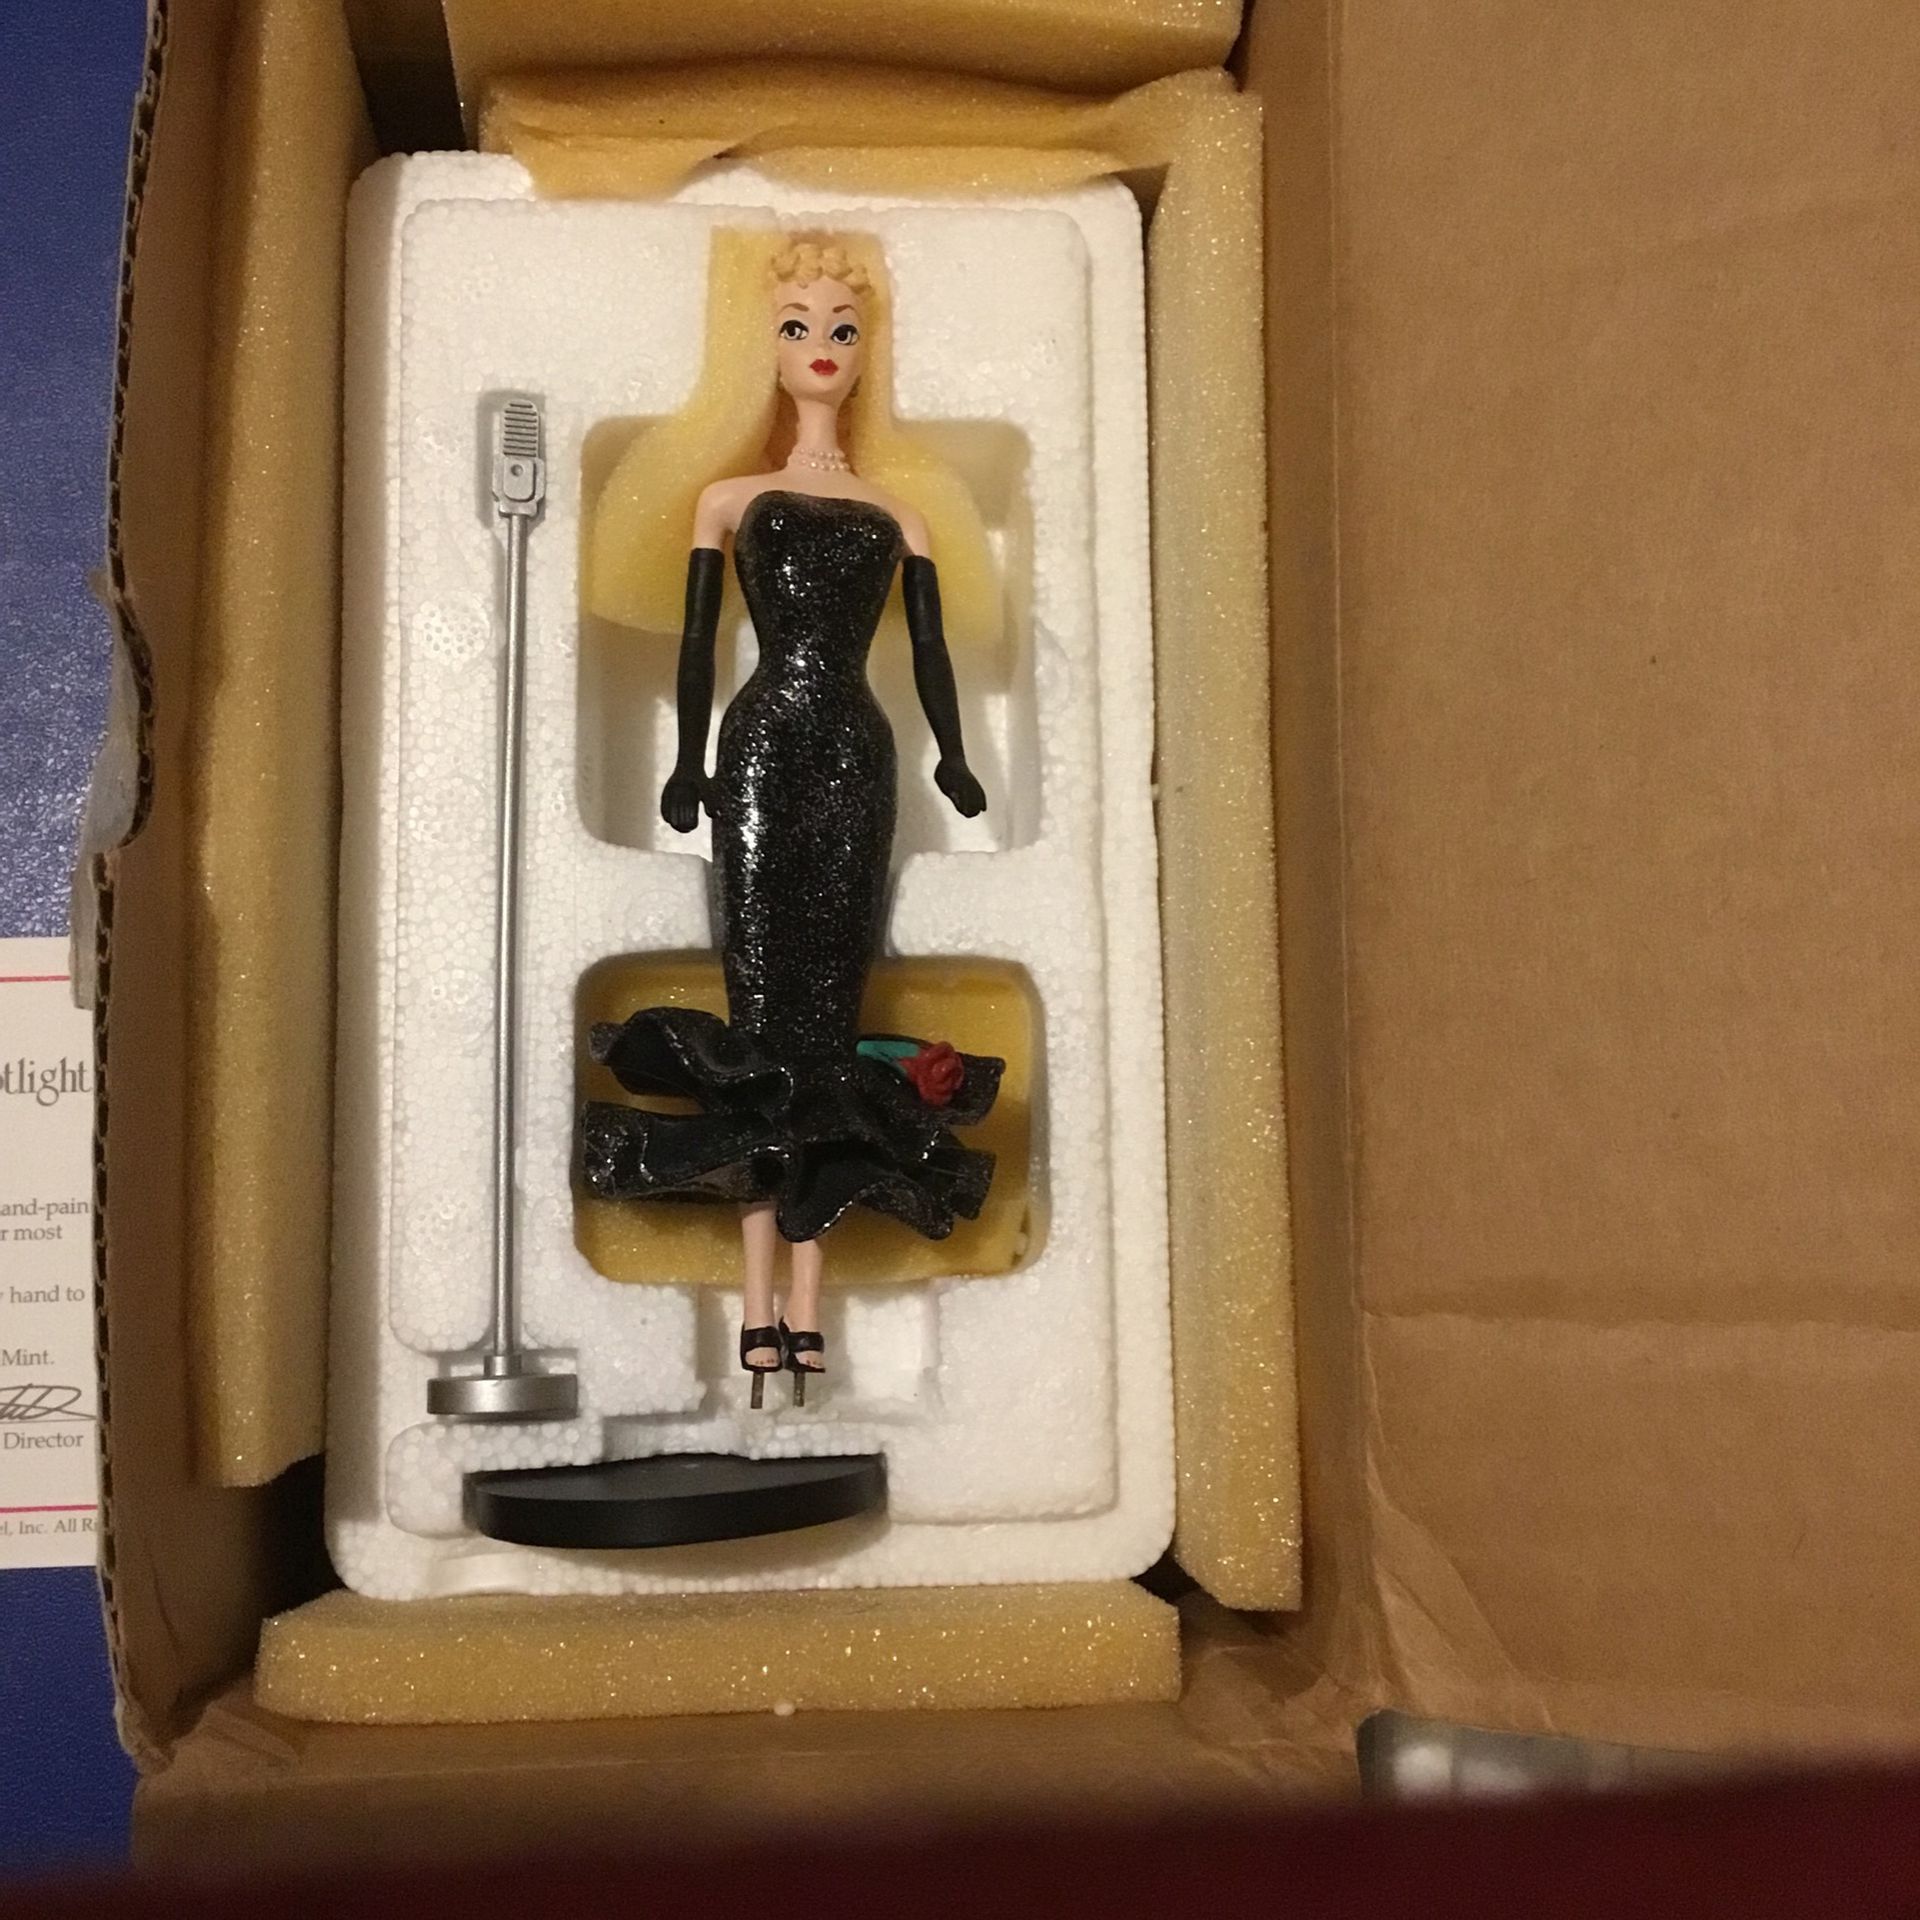 Danbury Mint The Classic Barbie Figurine Collection ‘Solo In The Spotlight’ 1 Of 12 With COA